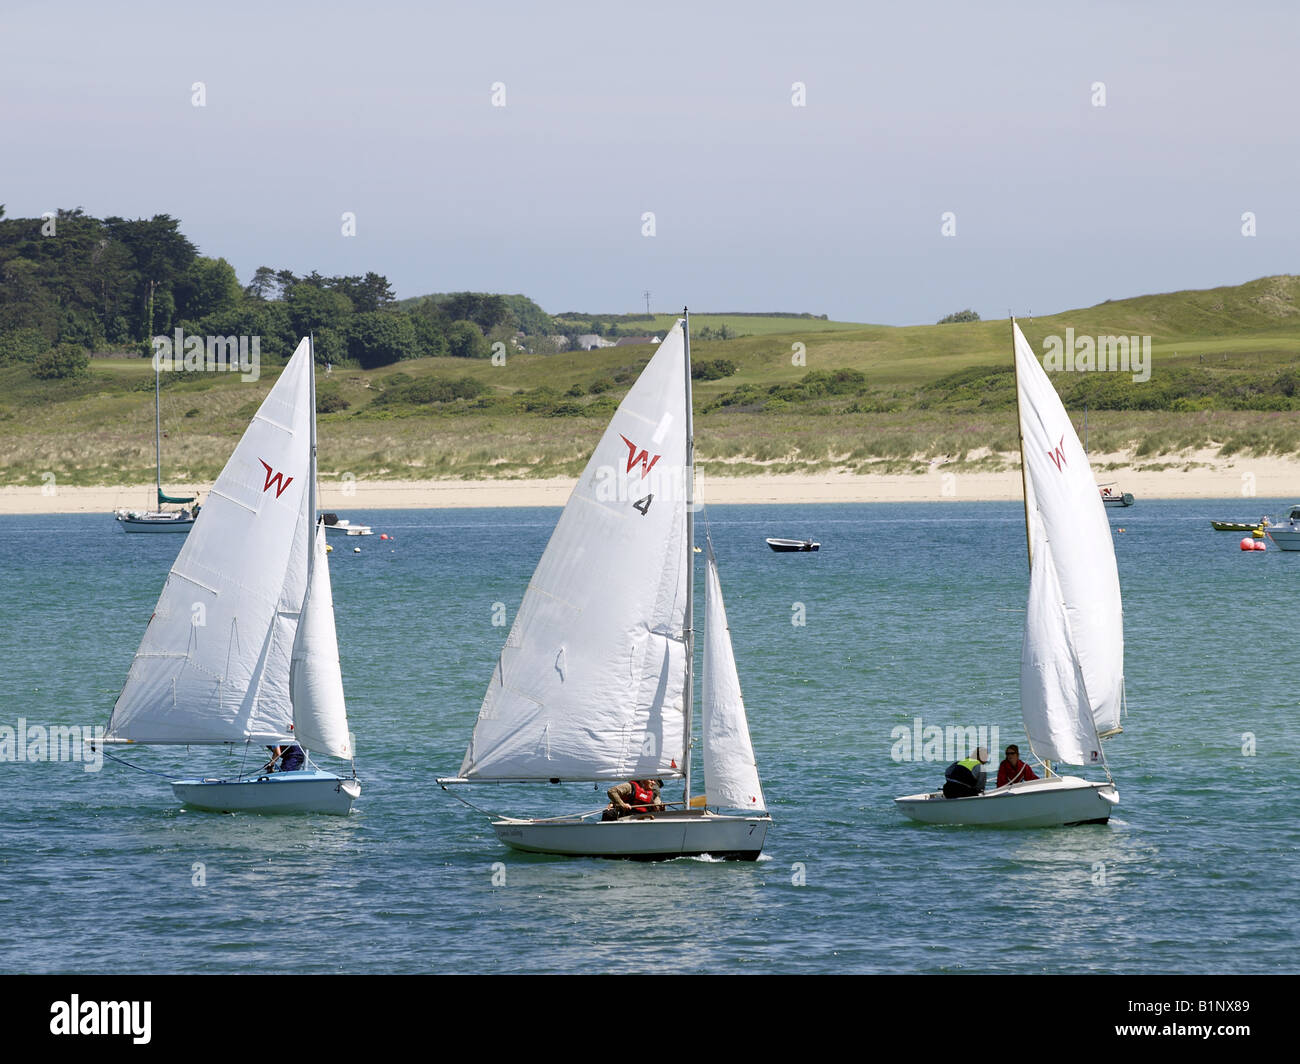 Three small sail boats on the water Stock Photo